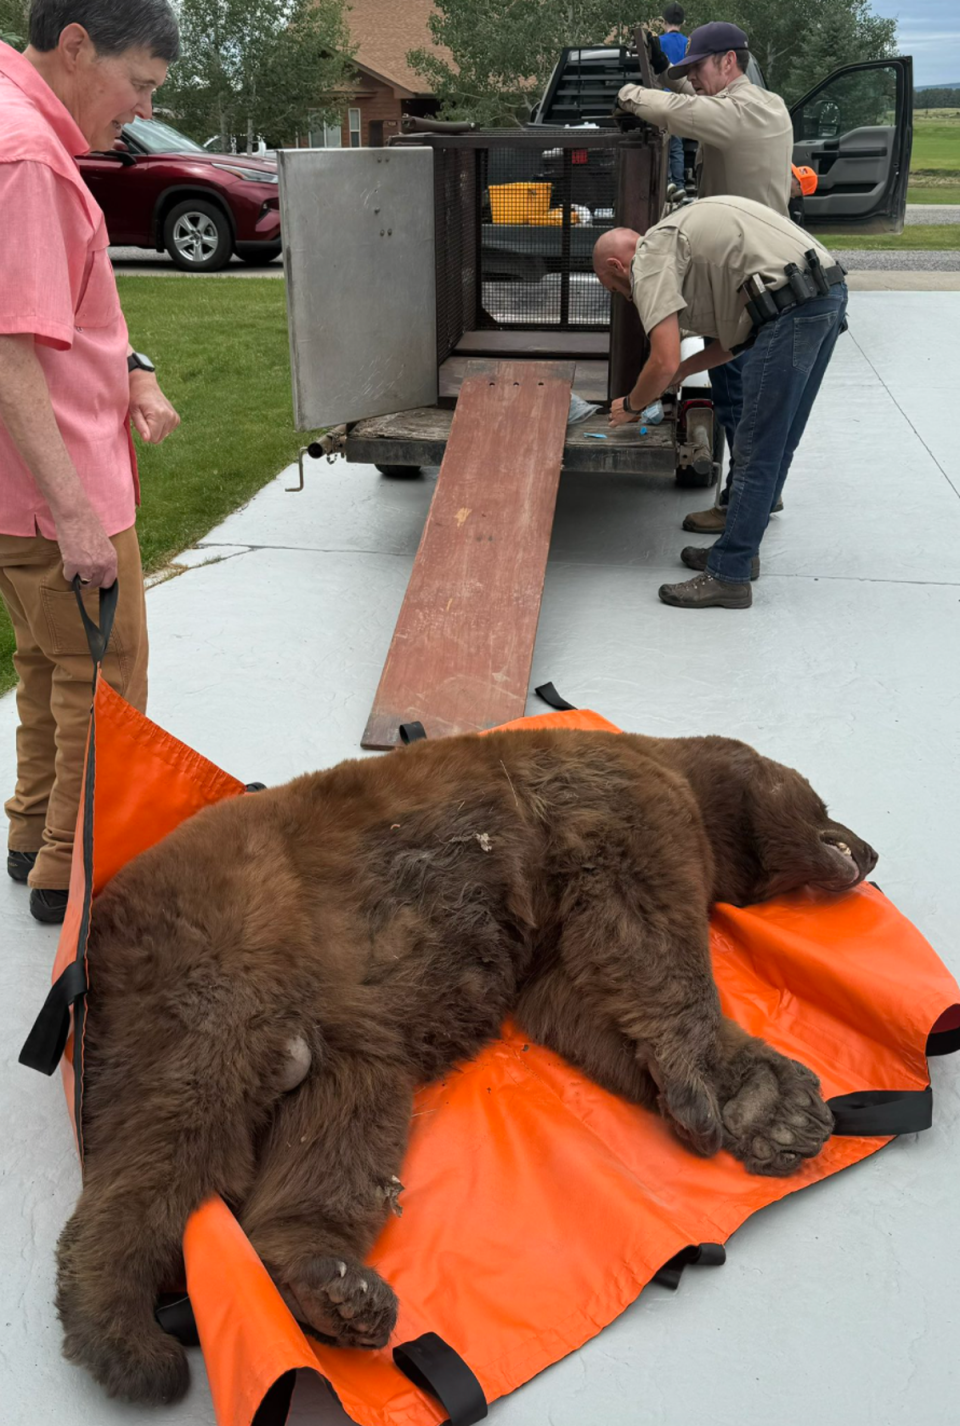 Sedated 400-lb bear that was hiding under a family’s deck in Colorado (CPW)